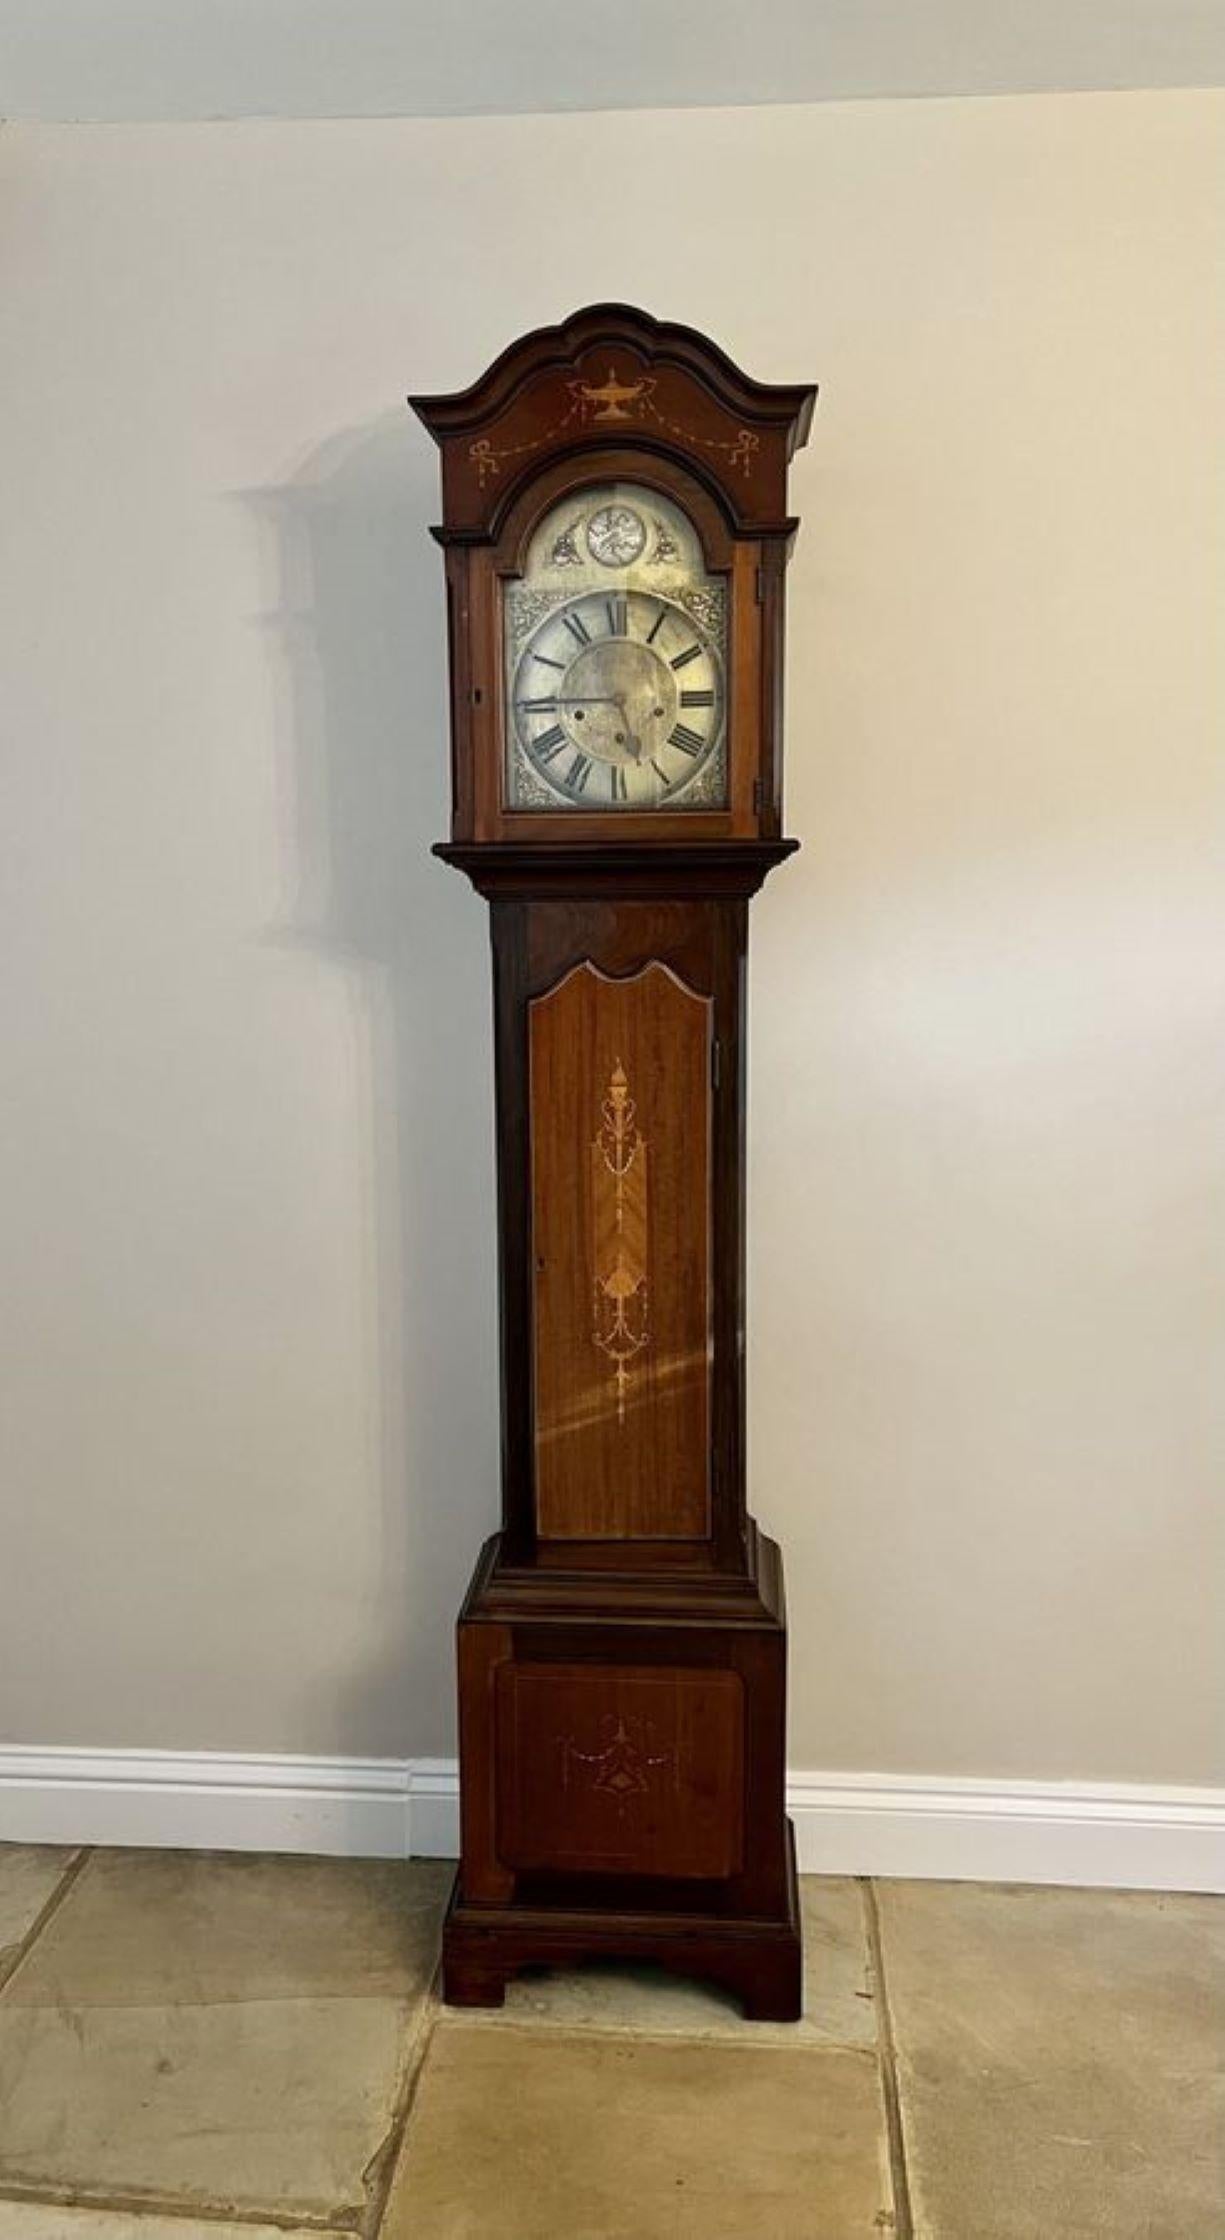 Fine quality antique Edwardian mahogany inlaid long case clock, having a quality mahogany inlaid case, a brass arch dial with Roman numerals, Tempus Fugit inscribed to the top, having a 8 day chiming movement chiming on the quarter, half and the